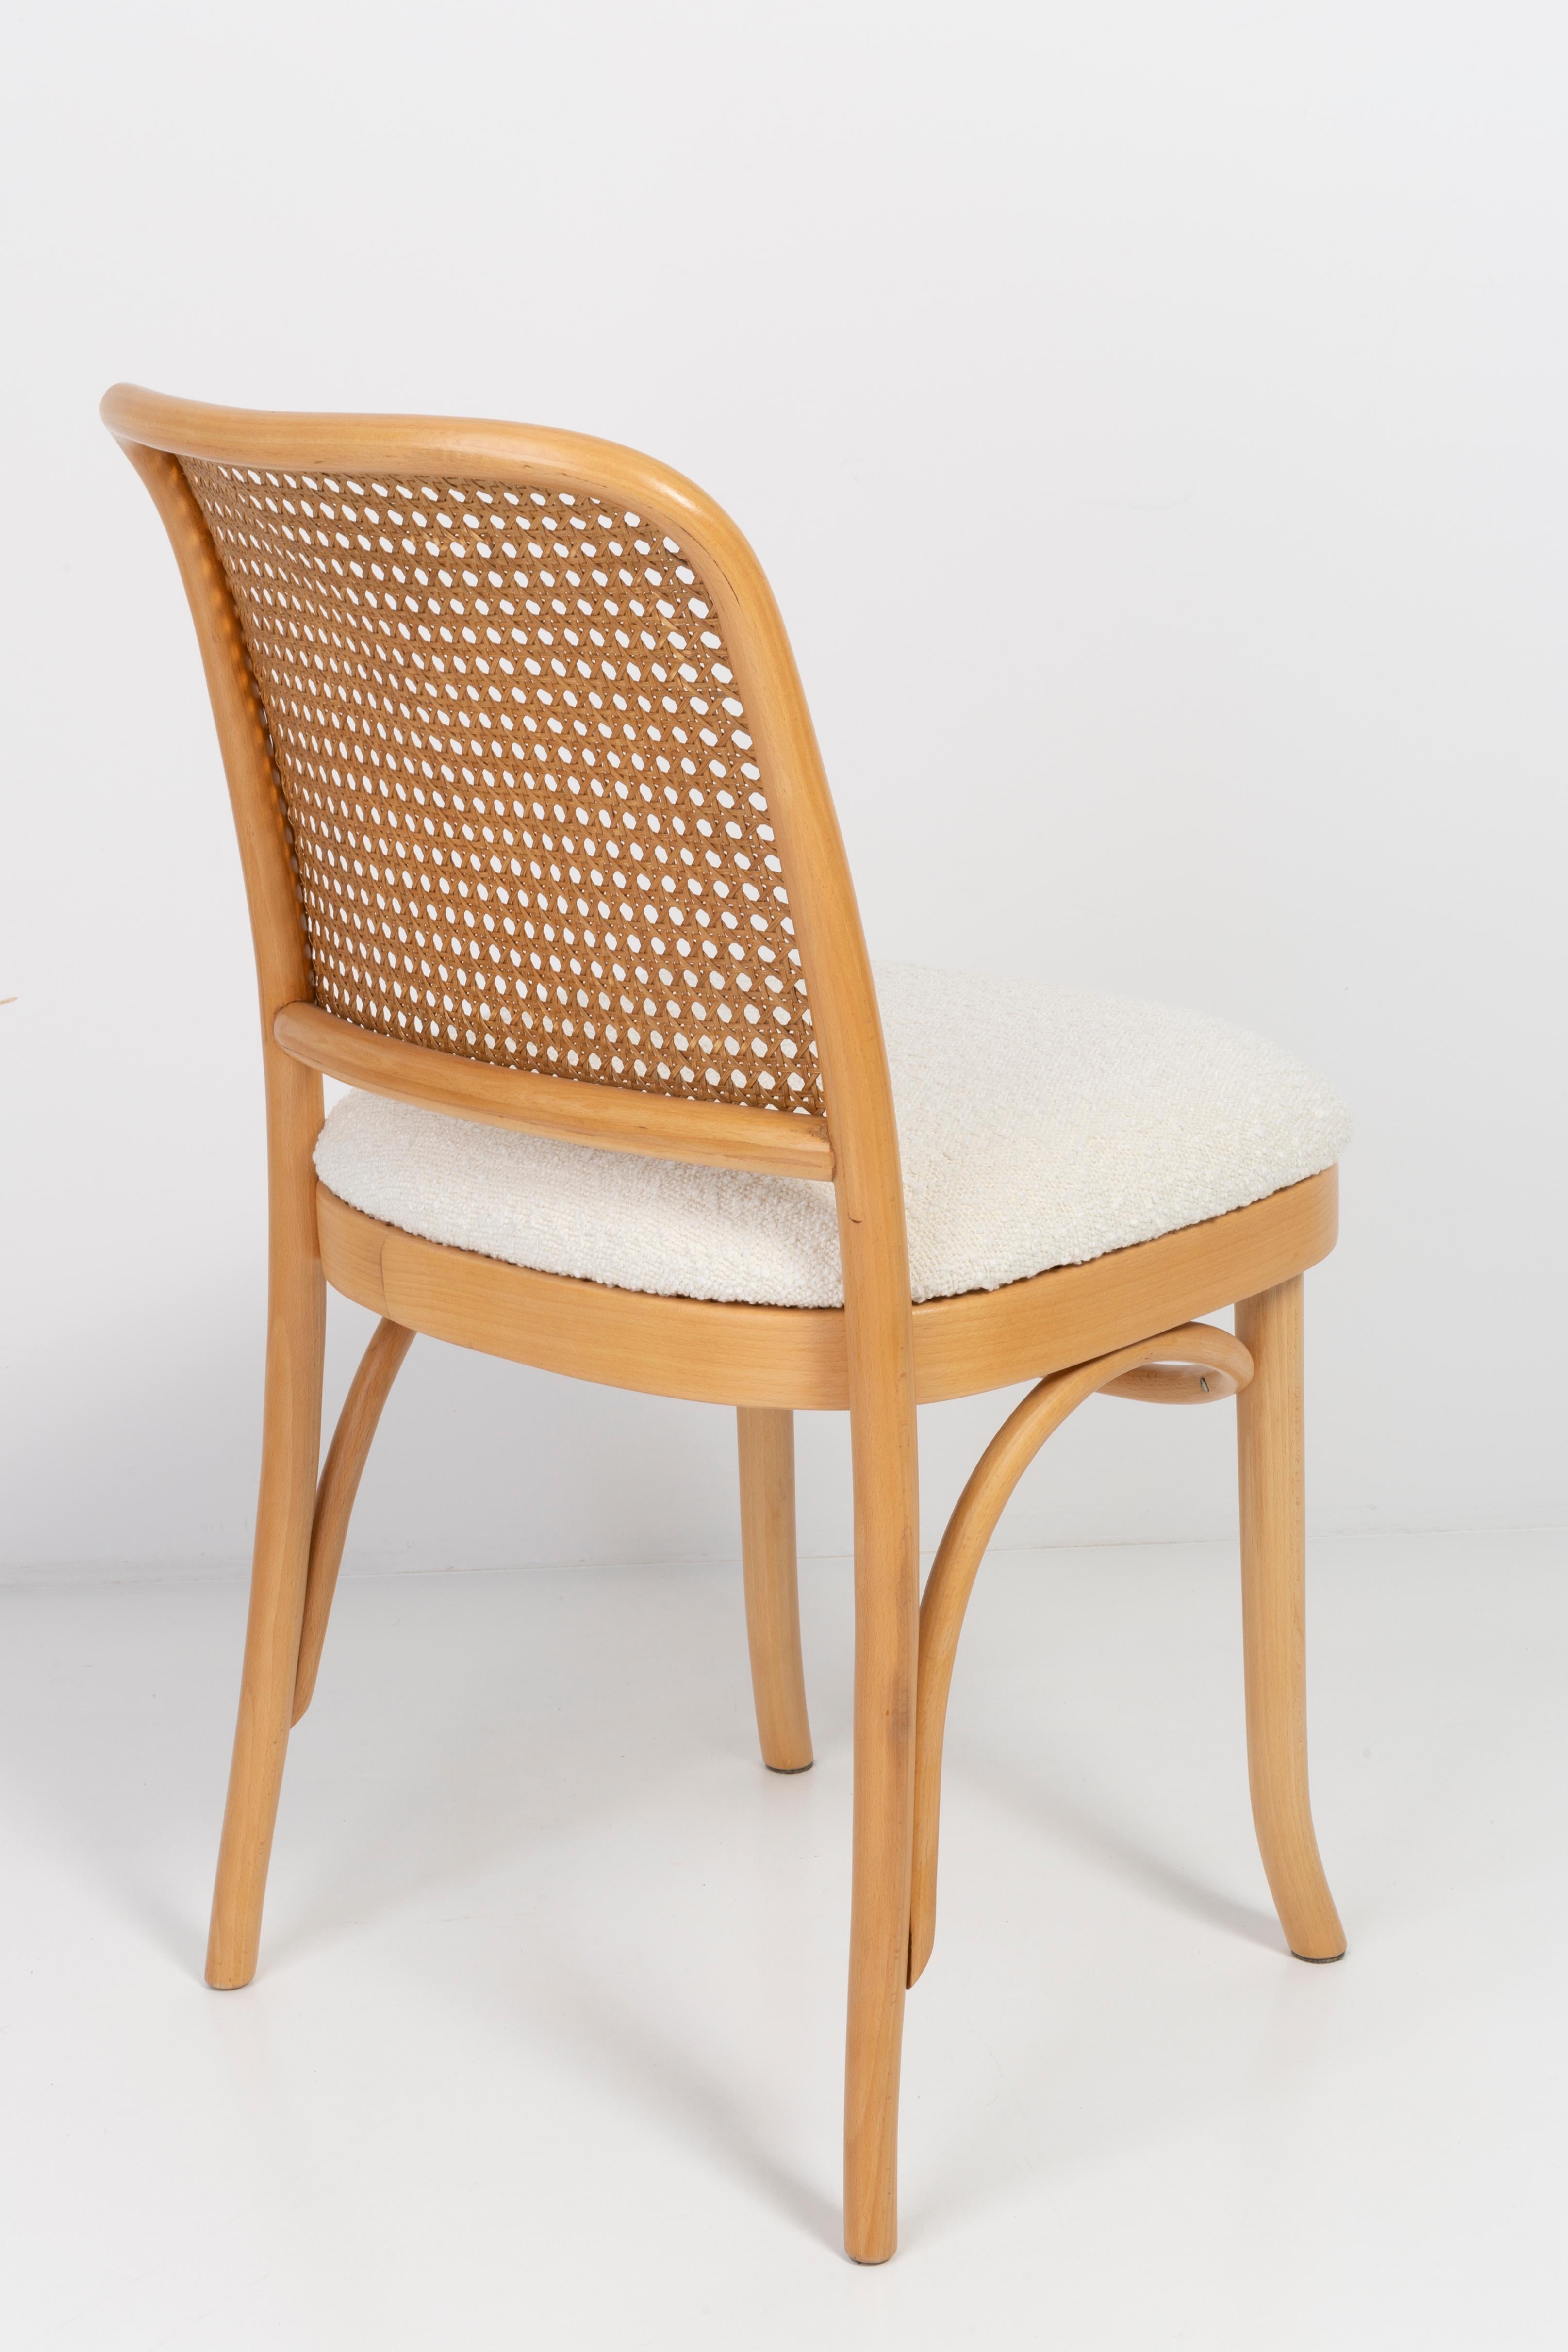 Set of Four White Boucle Thonet Wood Rattan Chairs, 1960s For Sale 6